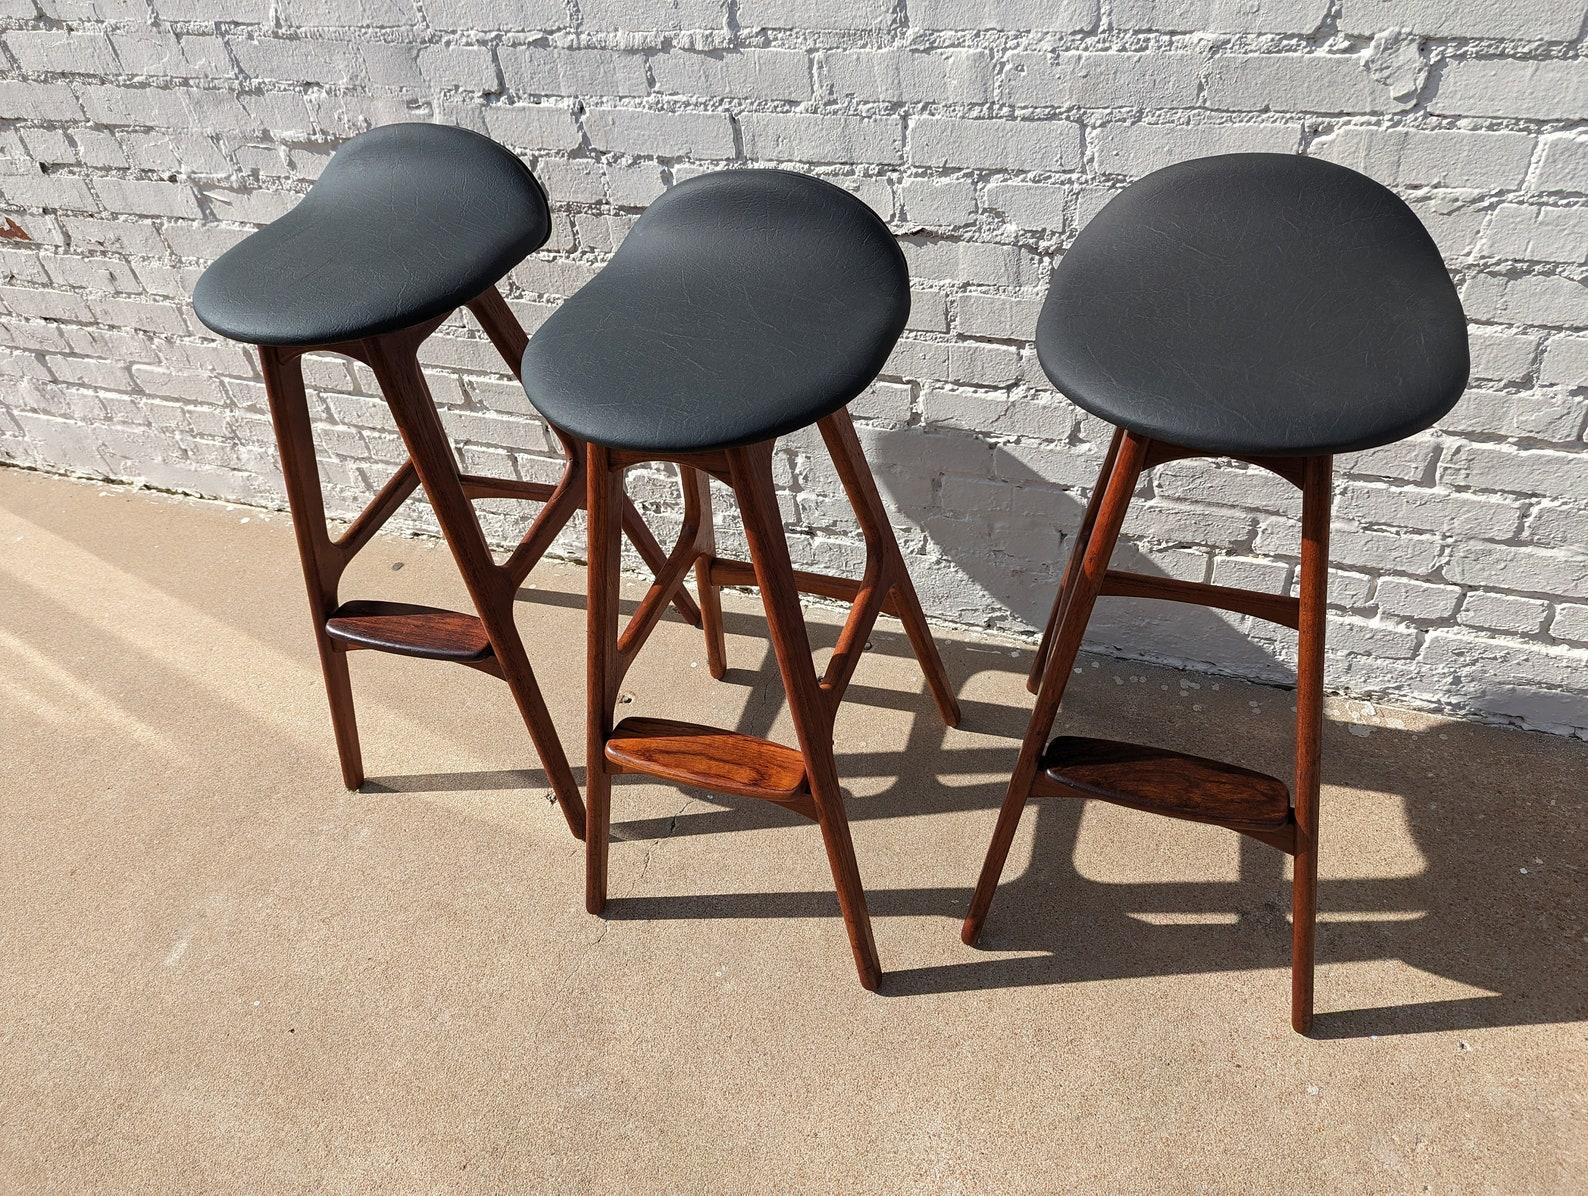 Set of 3 Mid Century Danish Modern Eric Buch Teak Barstools
 
Sold as set of 3. Above average vintage condition and structurally sound. Has some expected slight finish wear and scratching on frames. Imitation leather seats are new. One stool has an